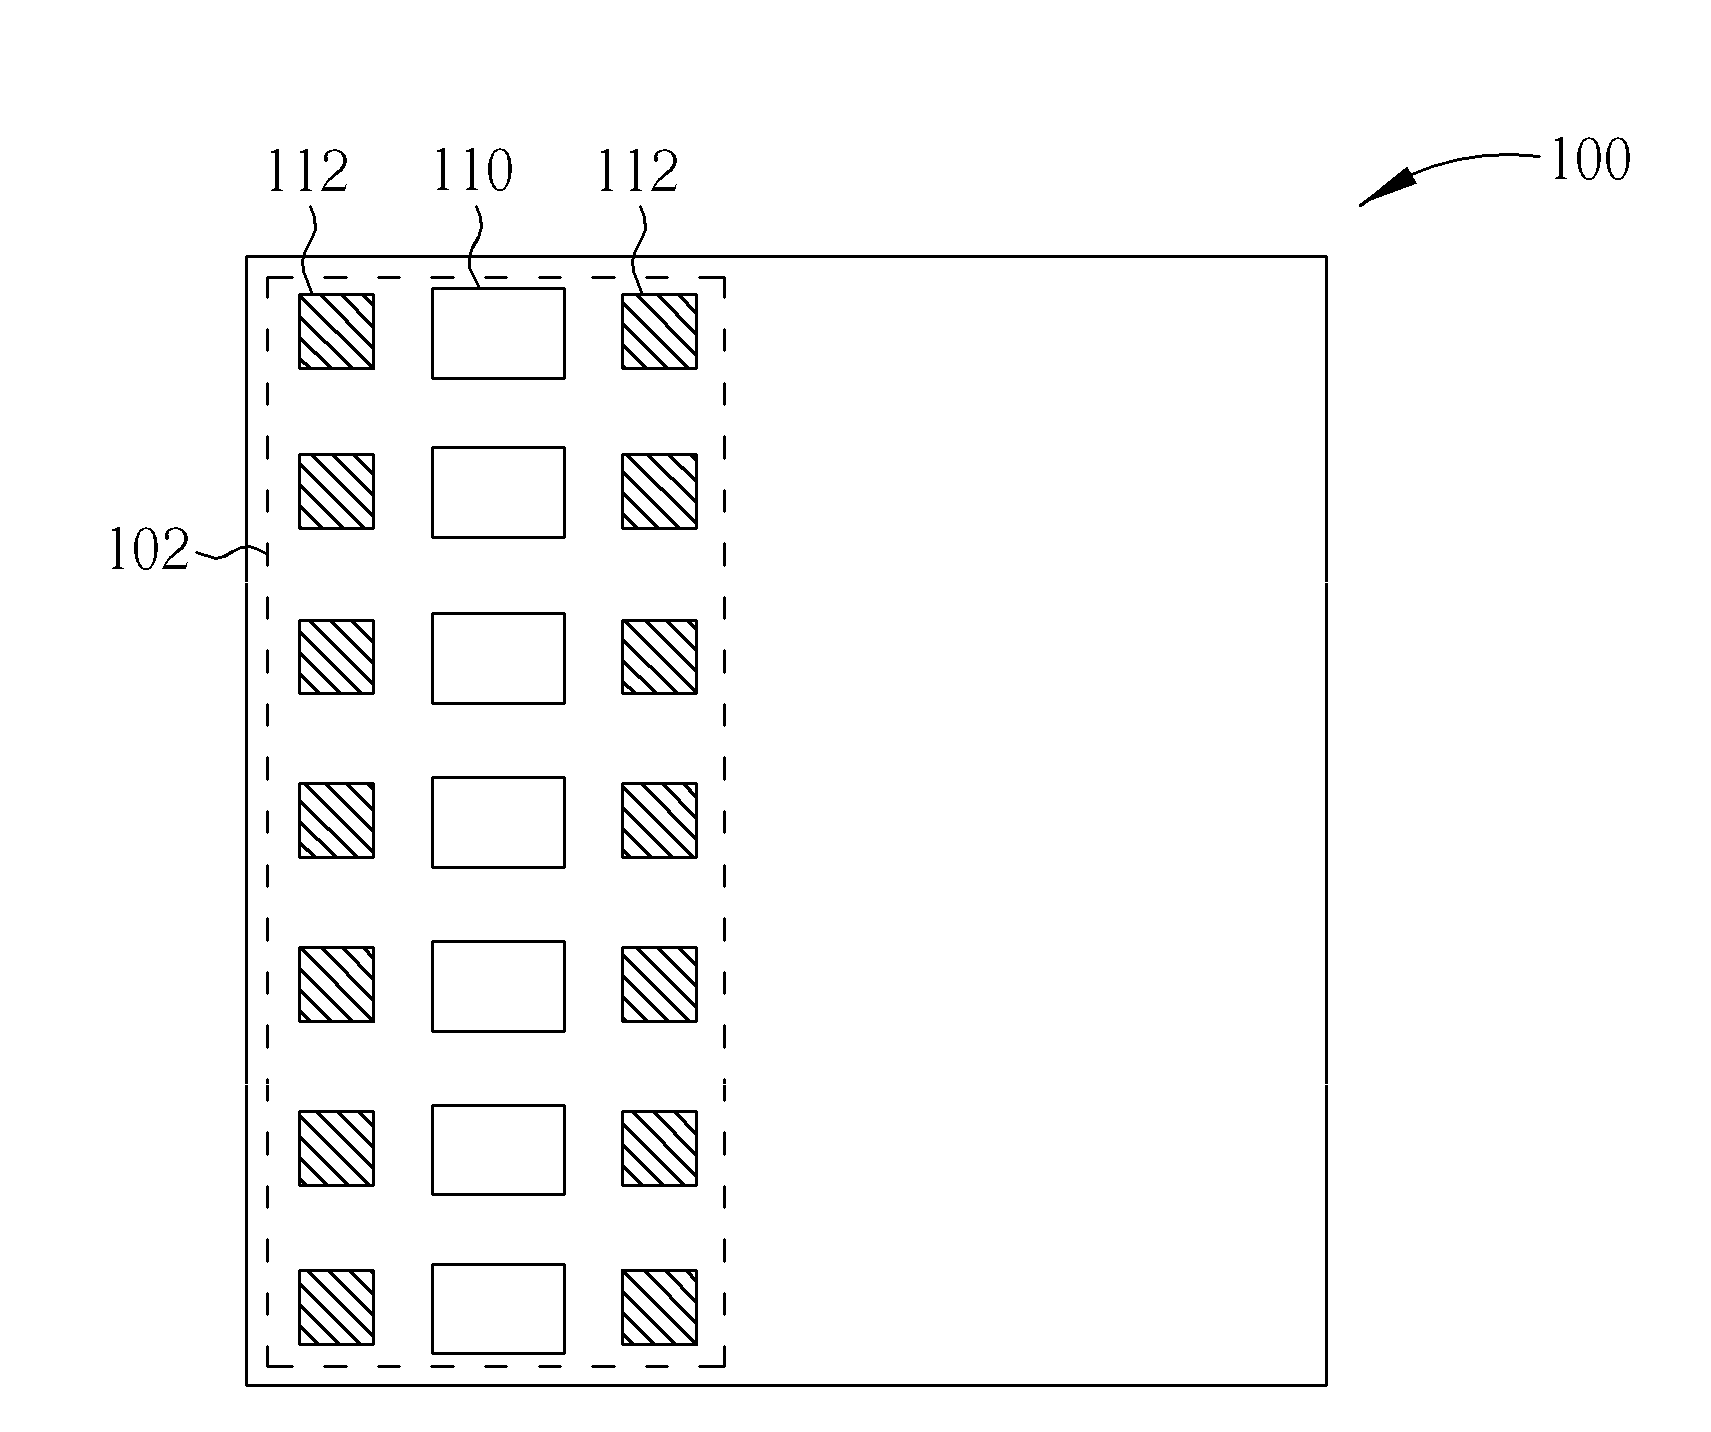 Method of forming assist feature patterns